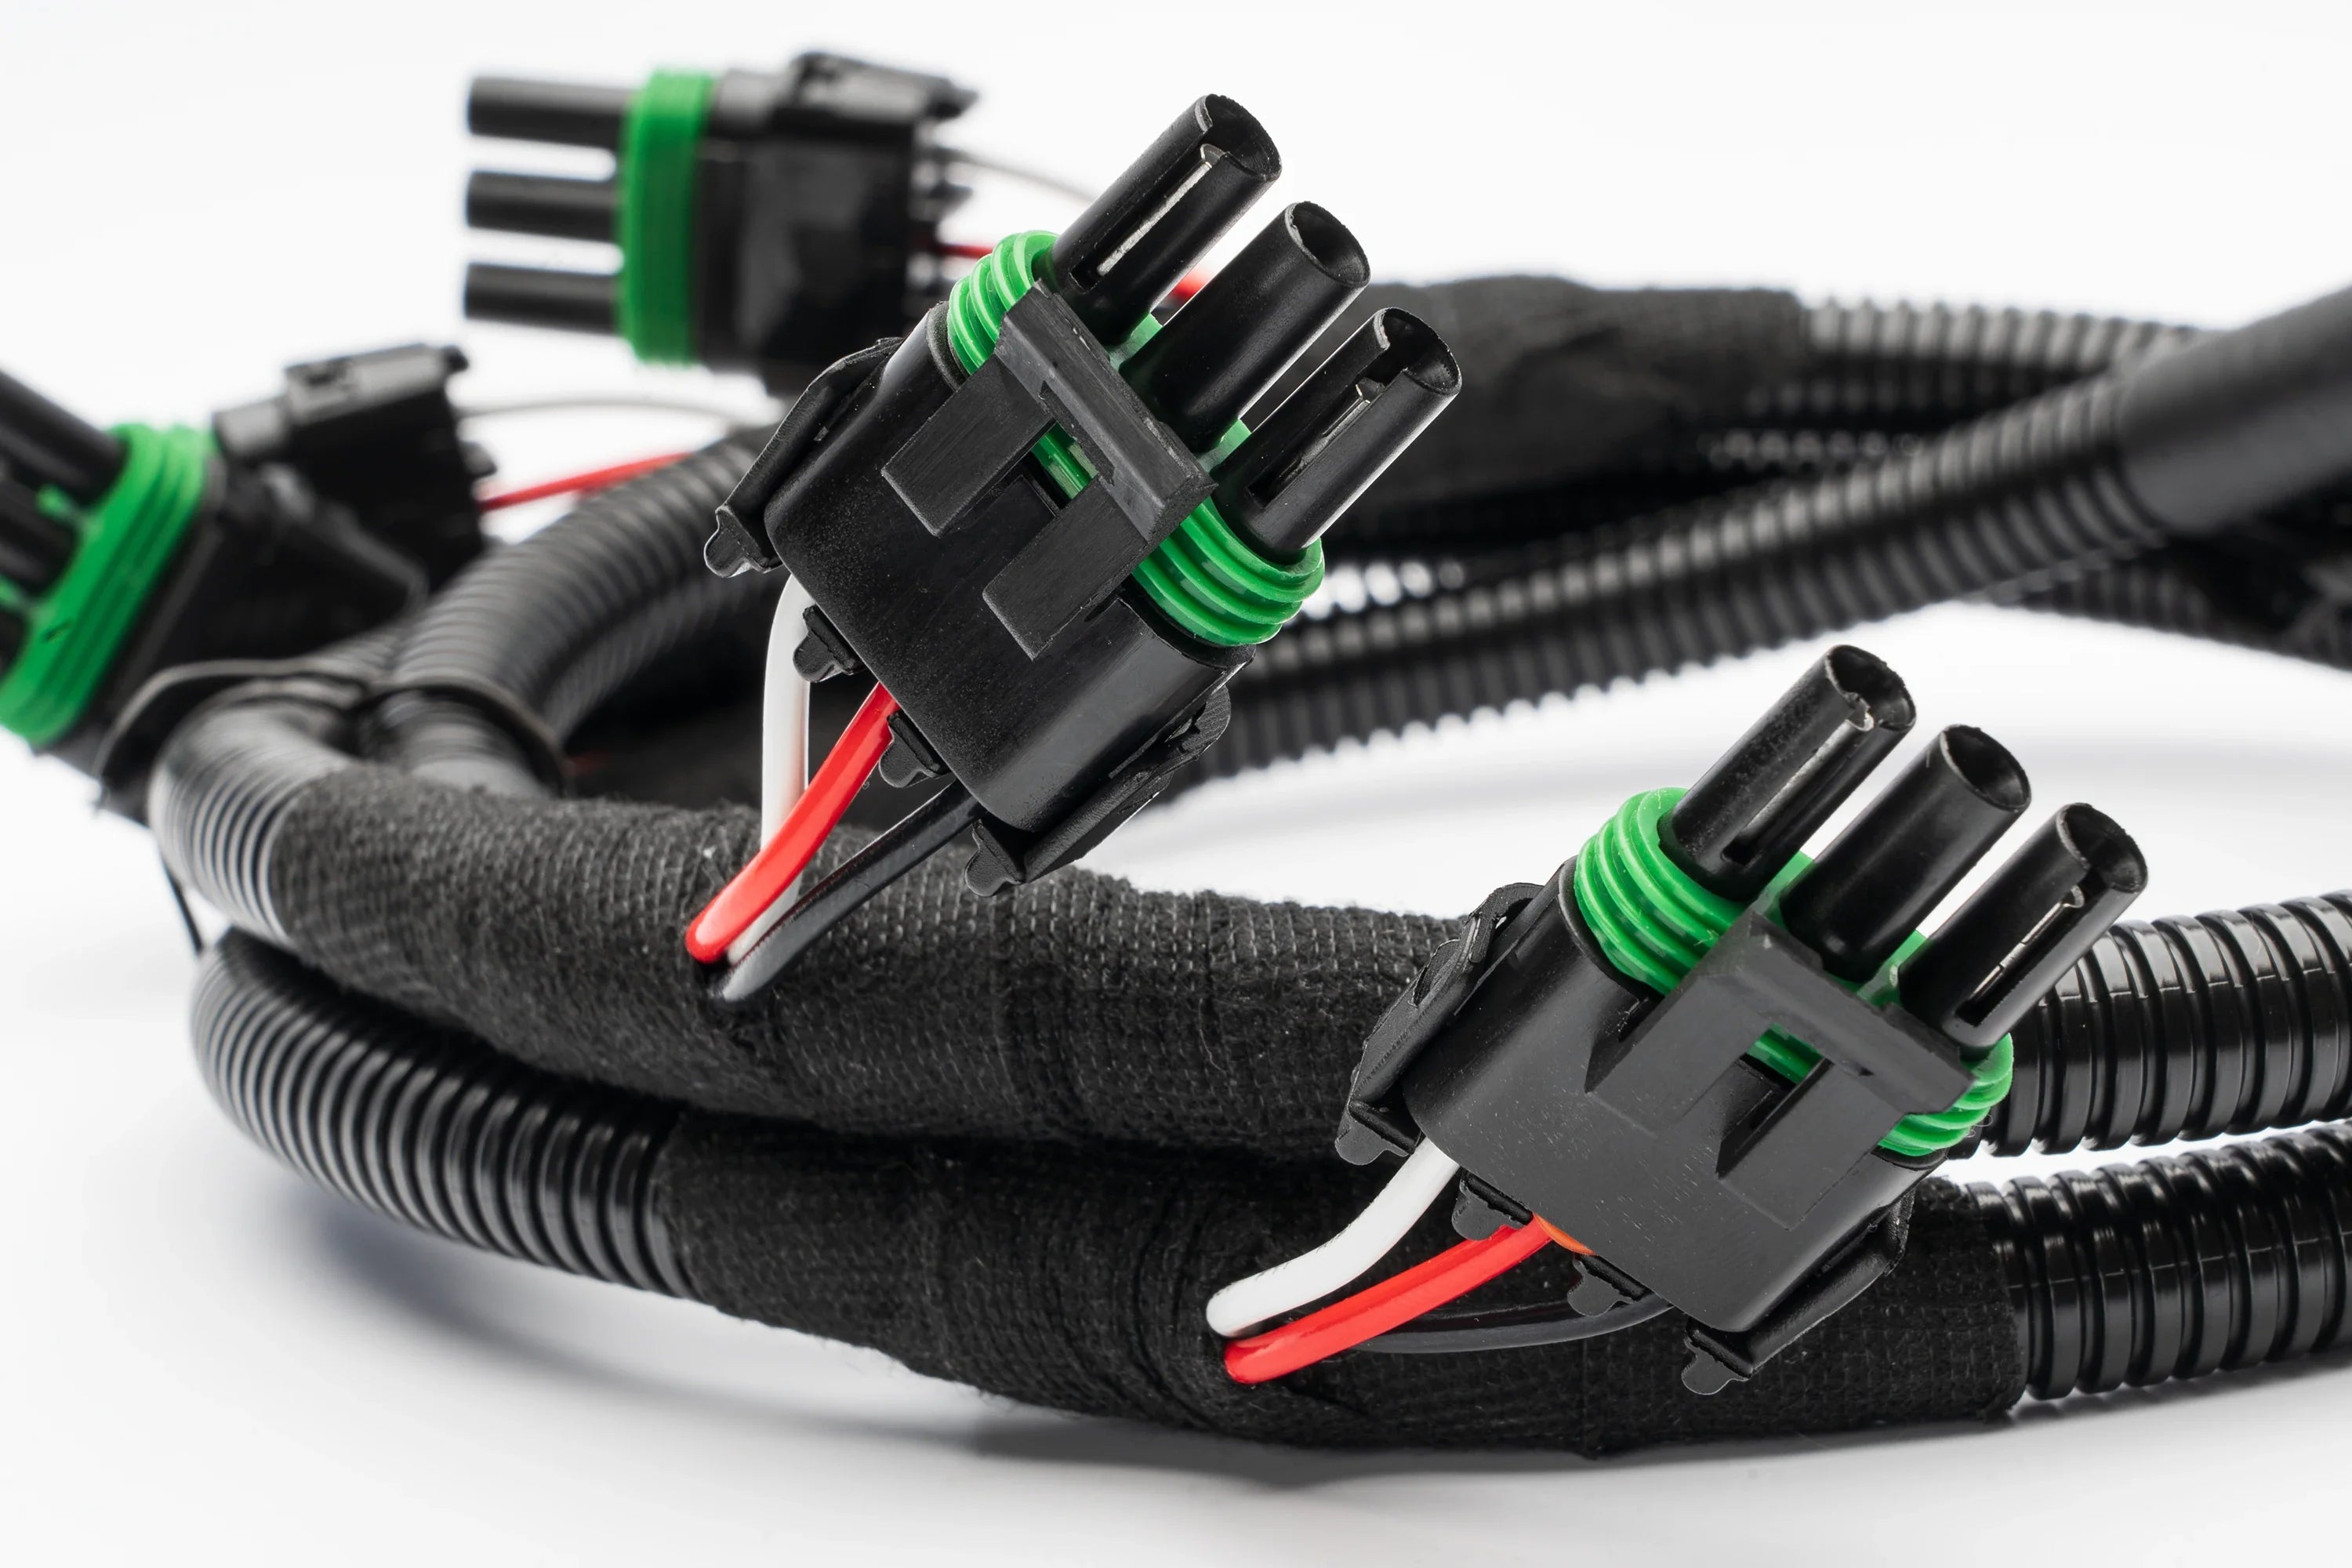 8X 3 Pole HD Chain Harness Splitter add on - SPV Harness System (Works with MANY vehicles, See Details)